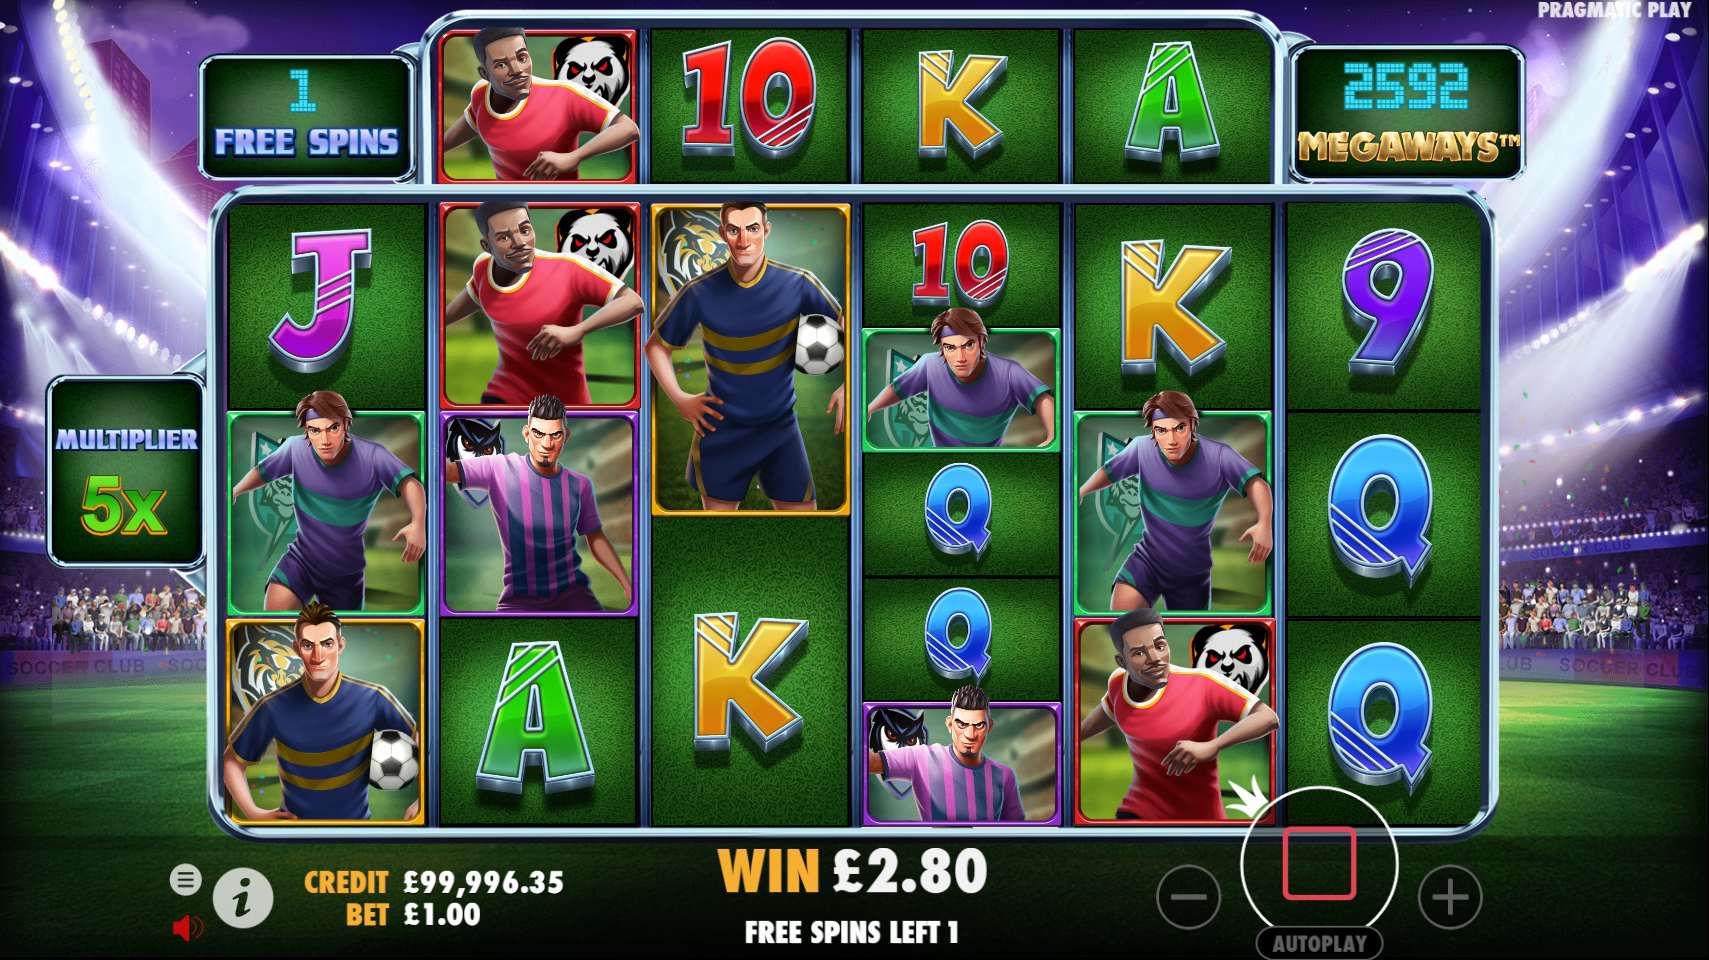 Spin and Score Megaways pragmatic play slot online demo